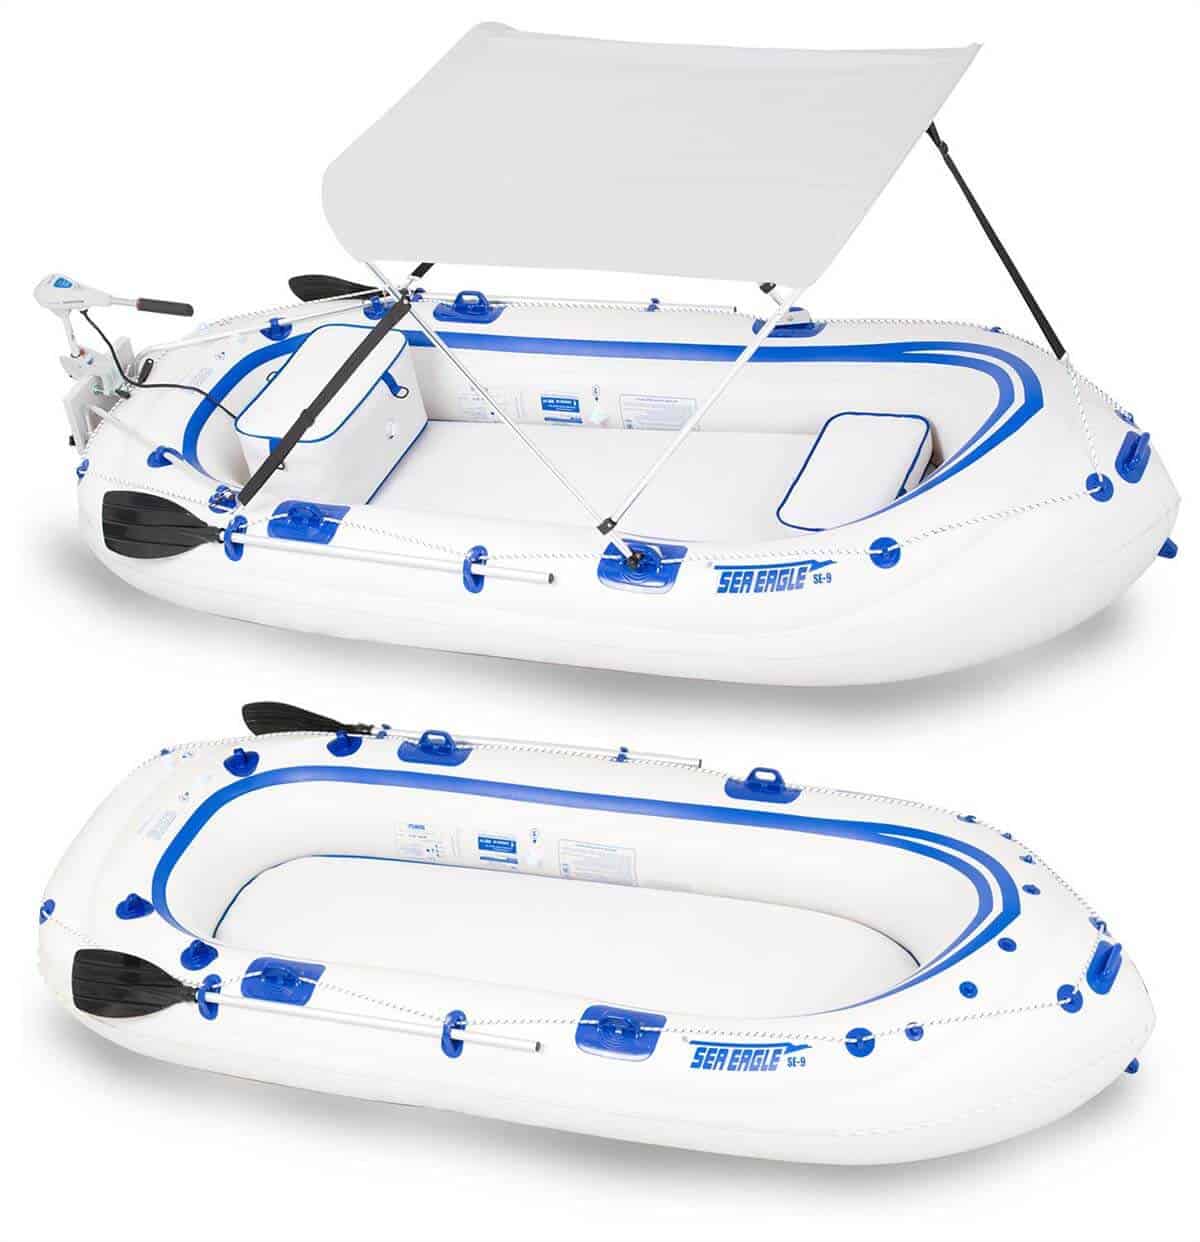 The Sea Eagle SE9 Motormount Inflatable Boat has customizable solutions to meet your every need.